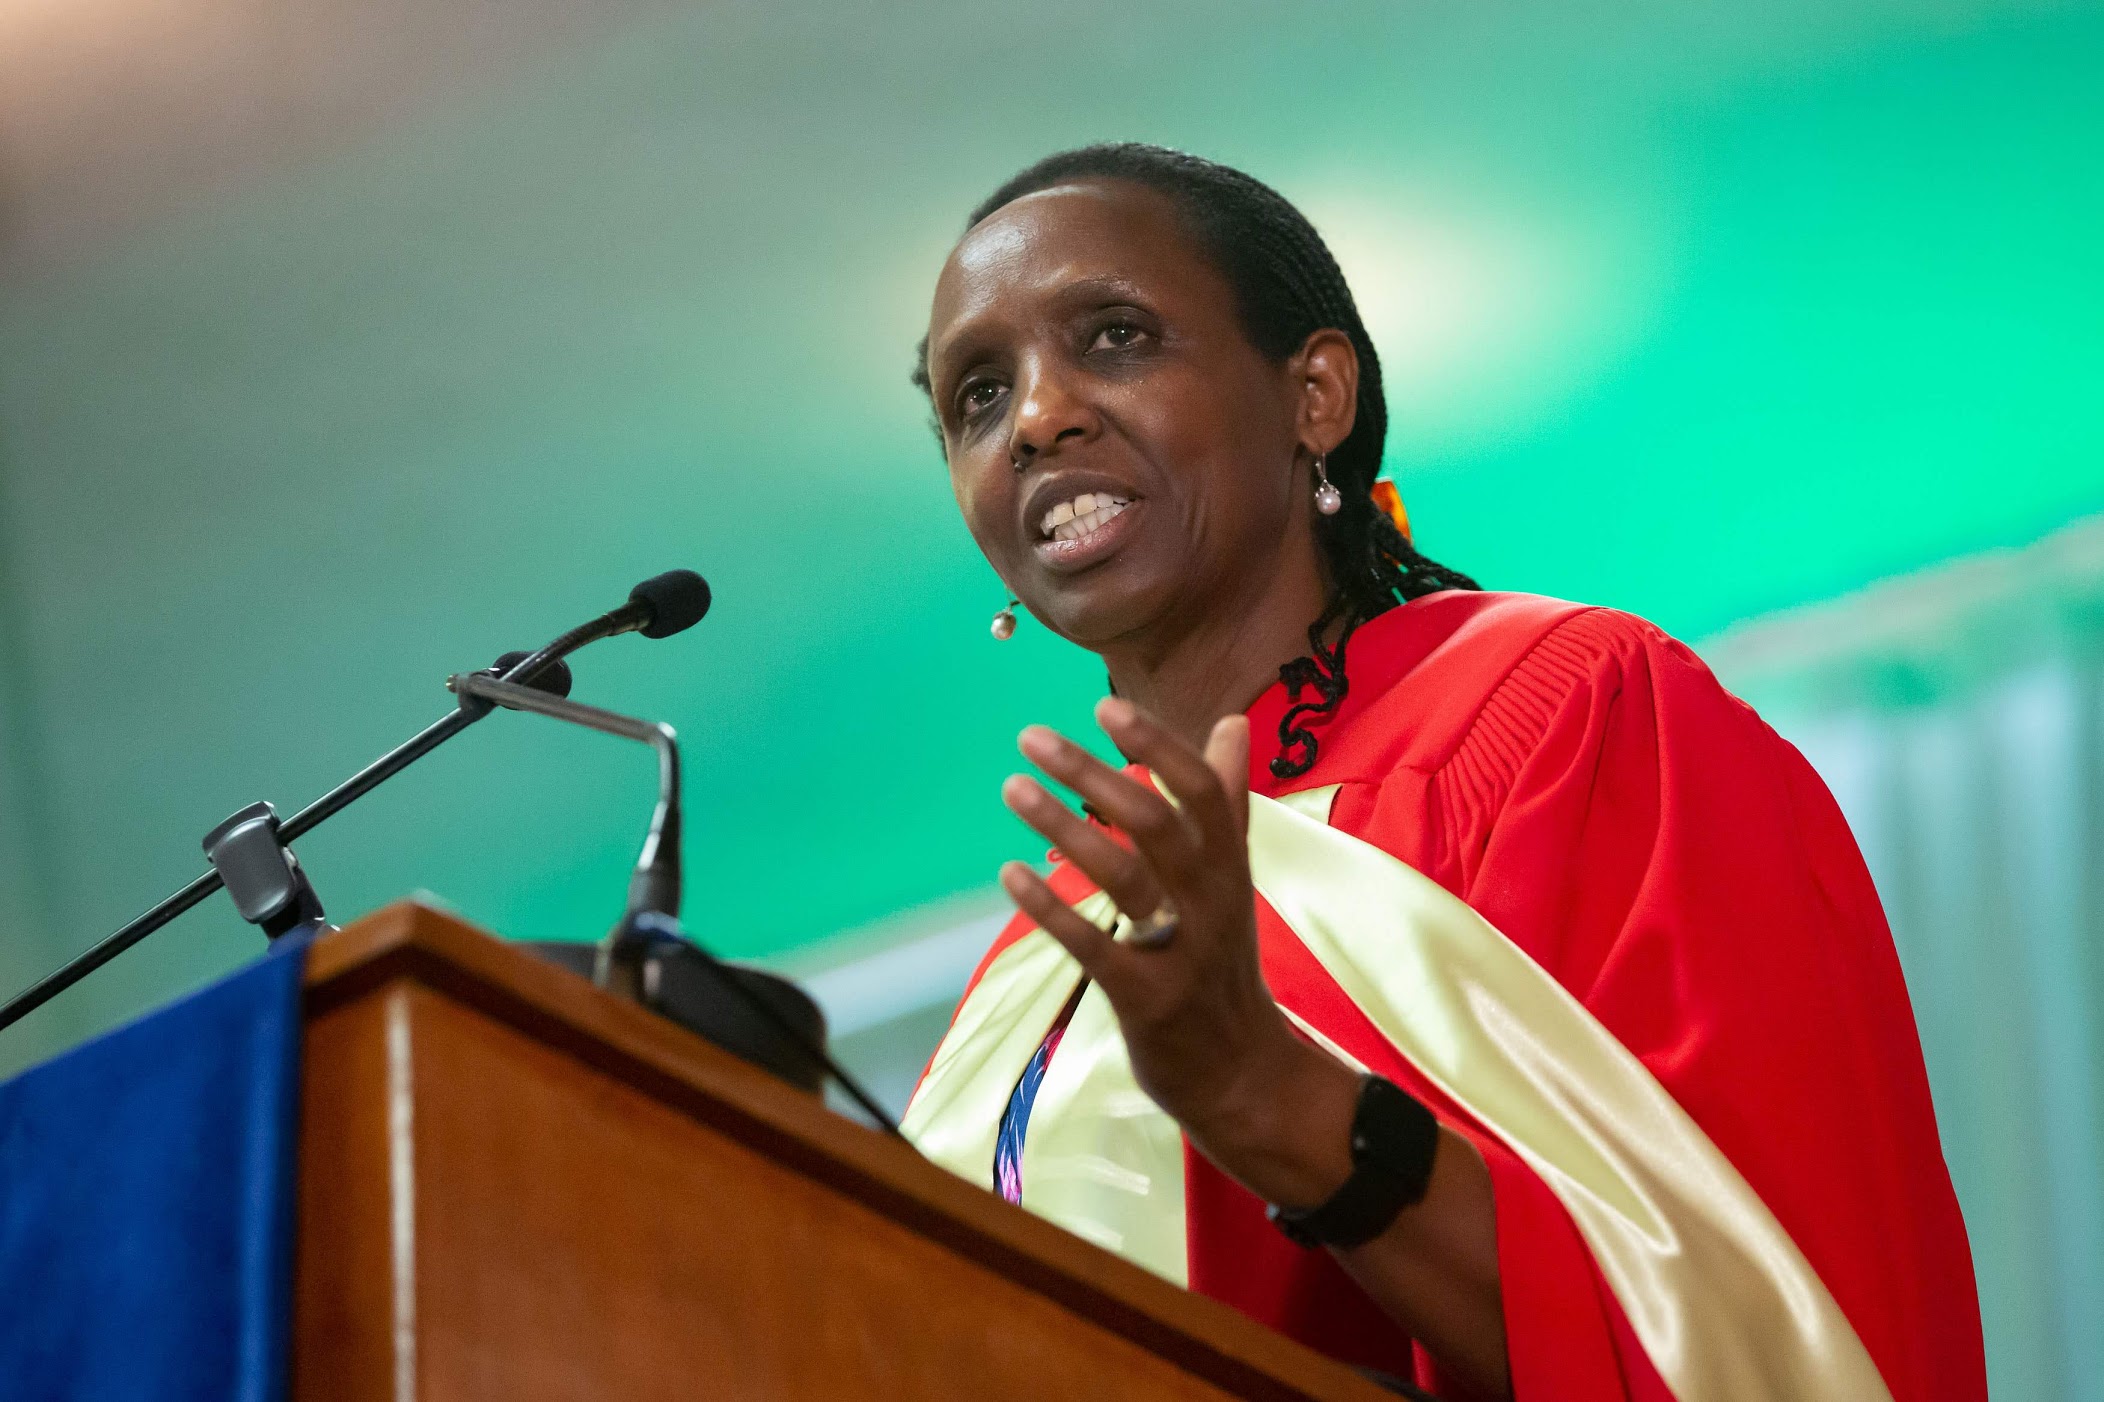 Agnes Kalibata was named UN Secretary General’s Special Envoy for 2021 Food Systems Summit